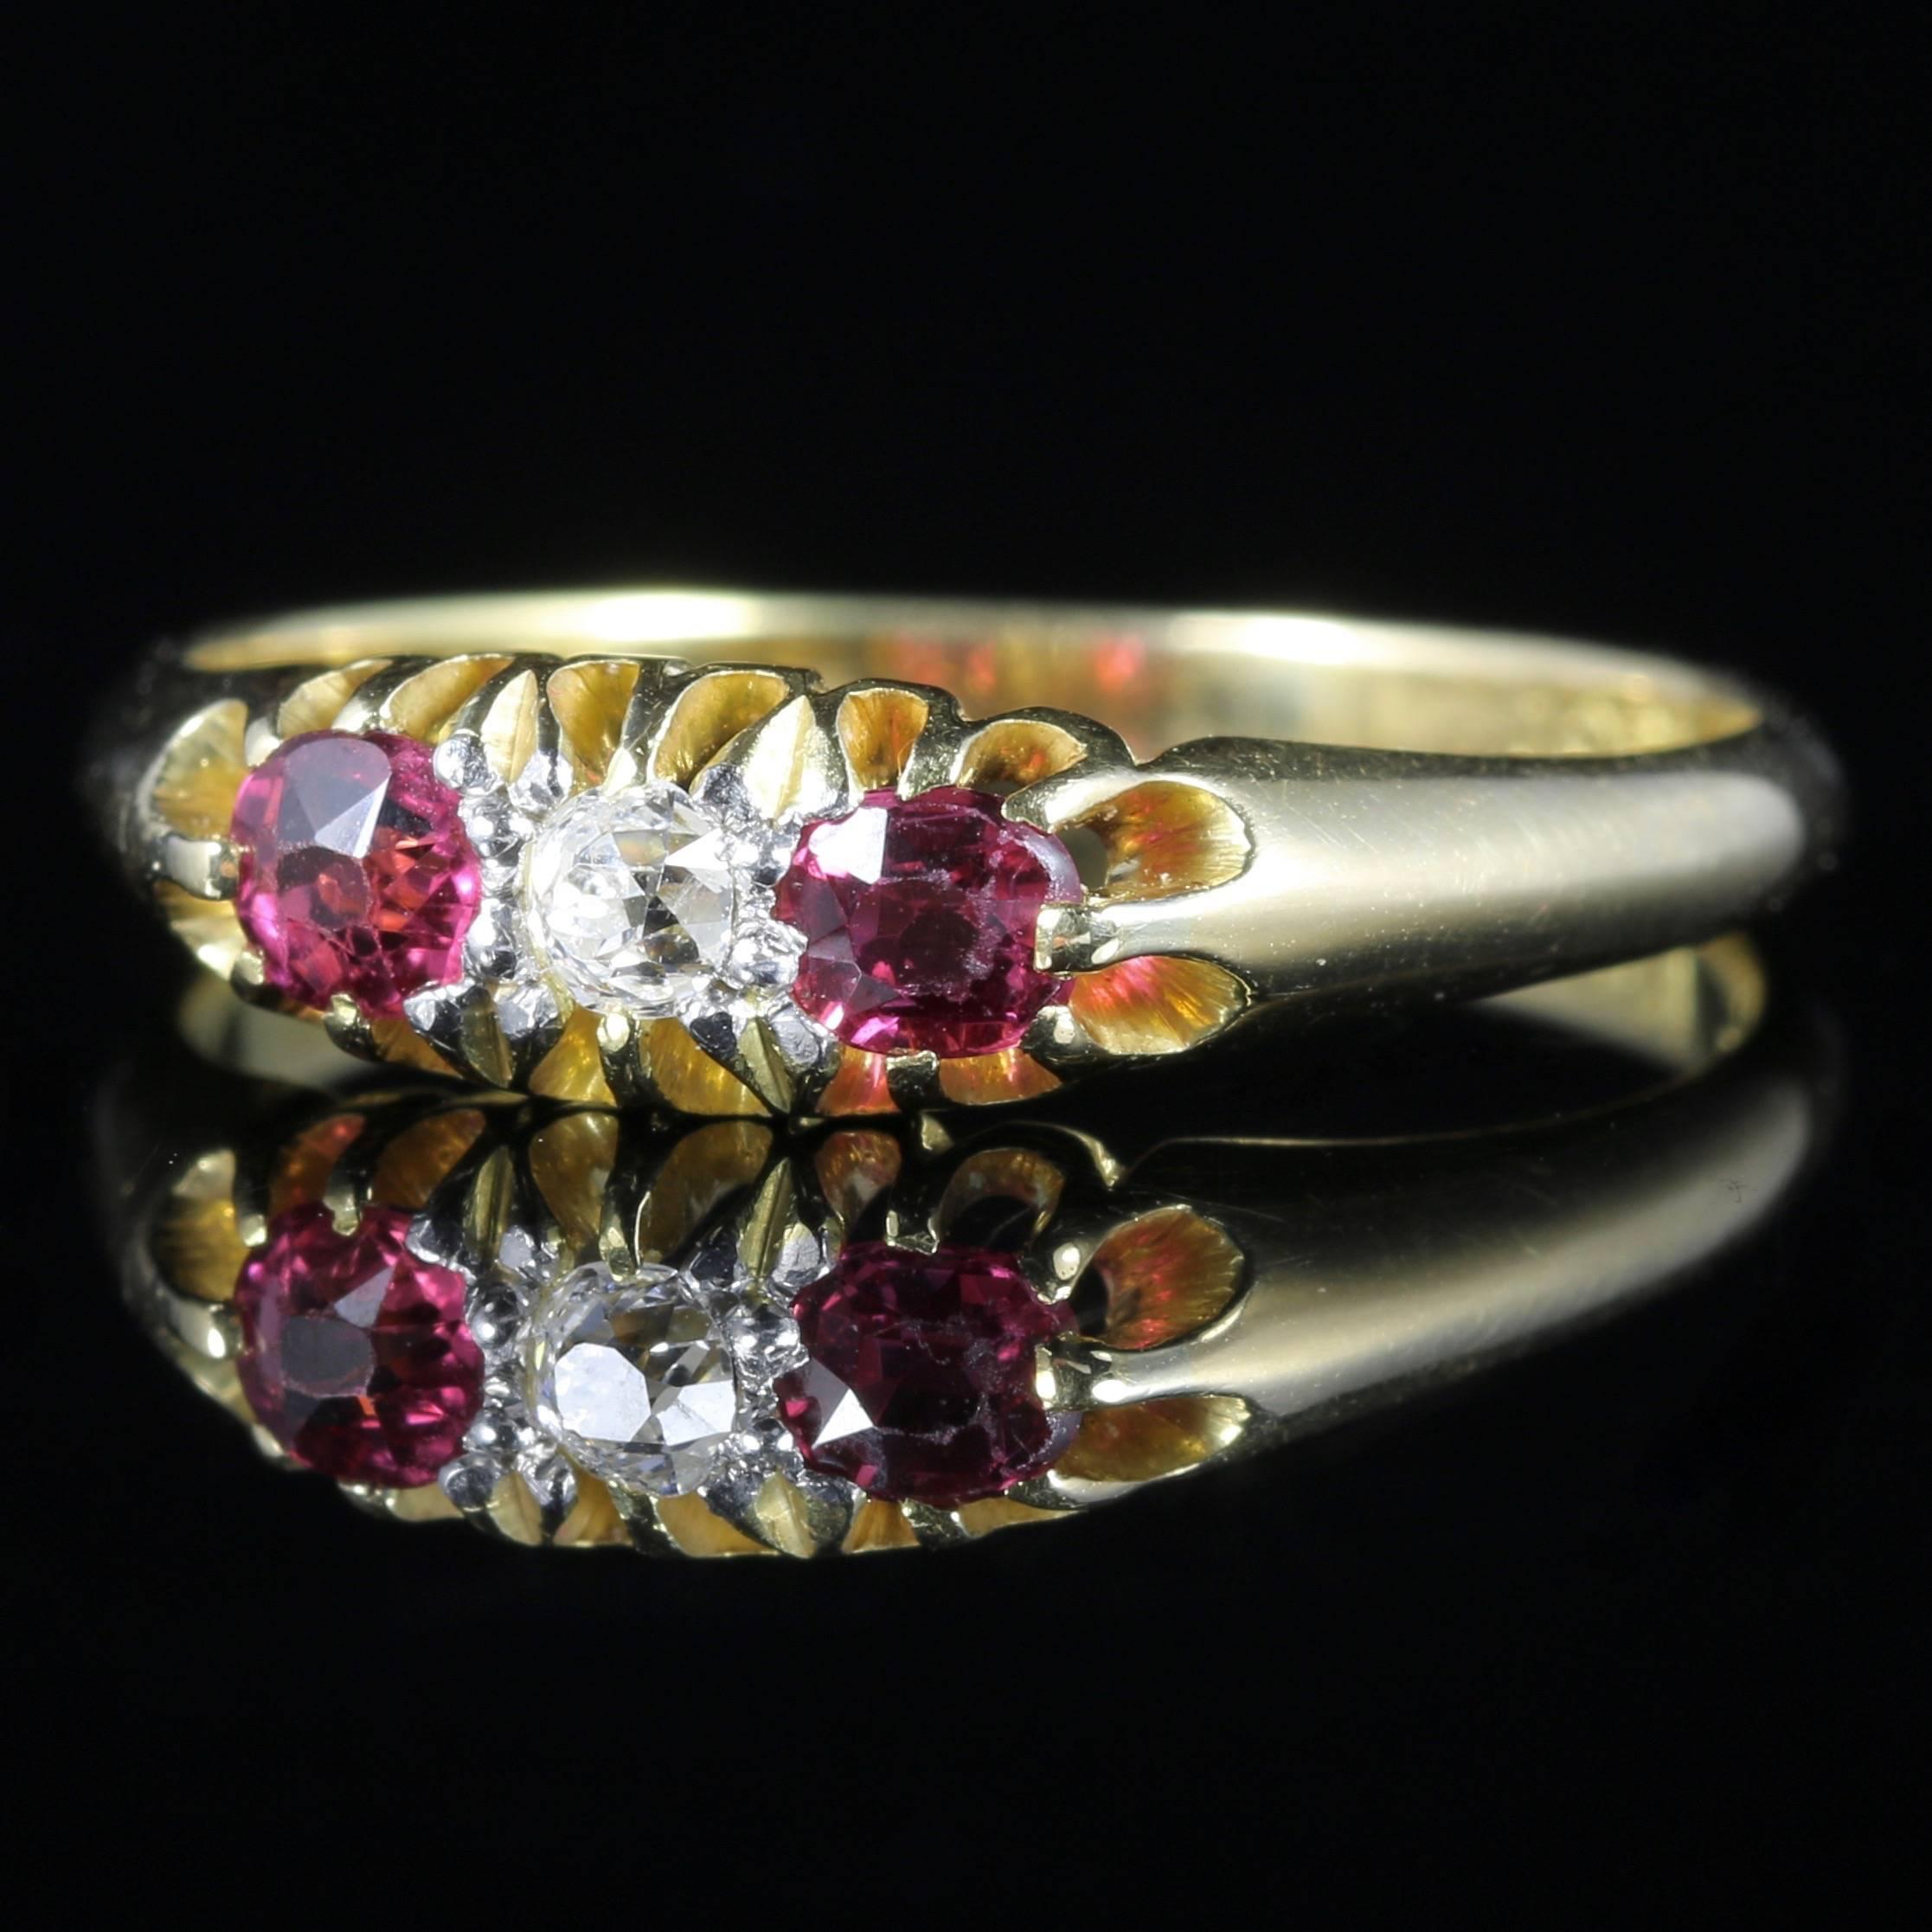 For more details please click continue reading down below...

This delightful Antique Ruby and Diamond ring is fully hallmarked 18ct Gold, Plat. Circa 1900

Set with a trilogy of stones, 2 Rubies which are 0.10ct each and a central Diamond which is